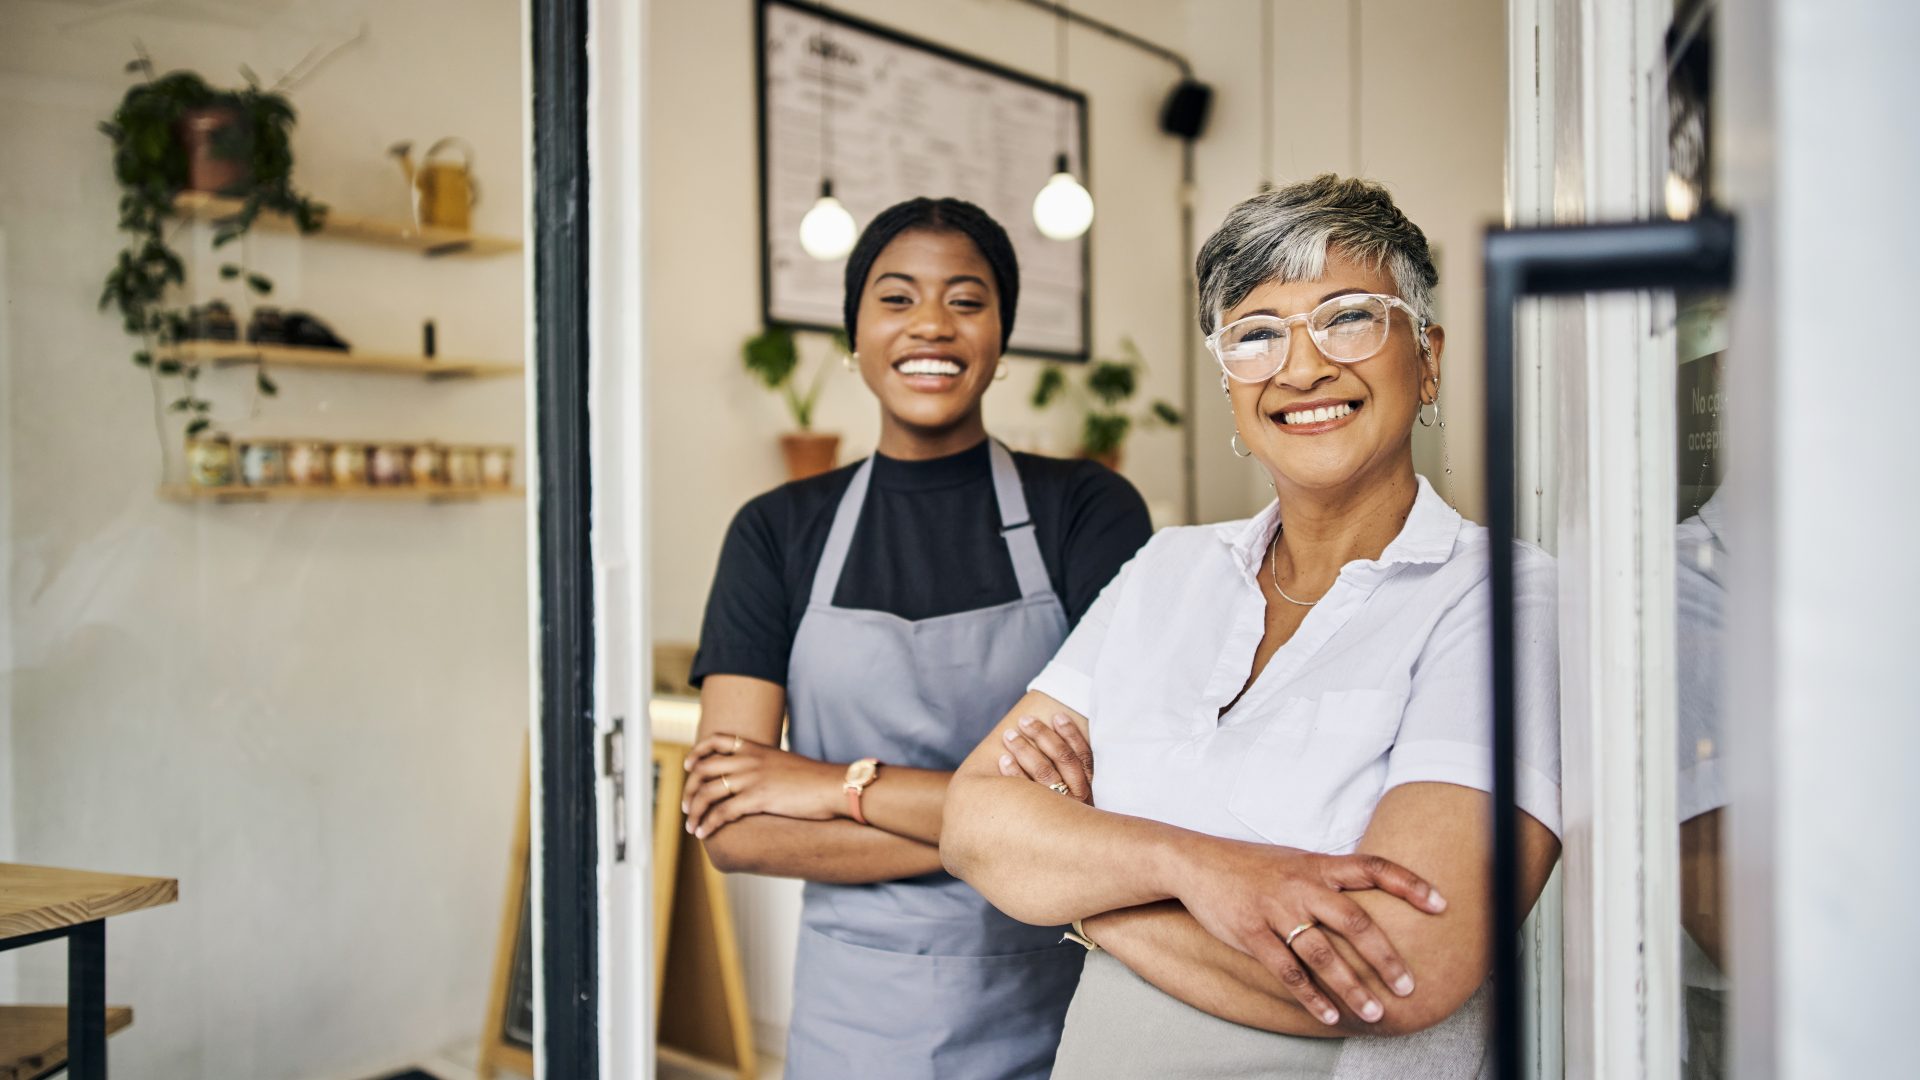 Coffee shop, senior woman manager portrait with barista feeling happy about shop success. Female server, waitress and small business owner together proud of cafe and bakery growth with a smile